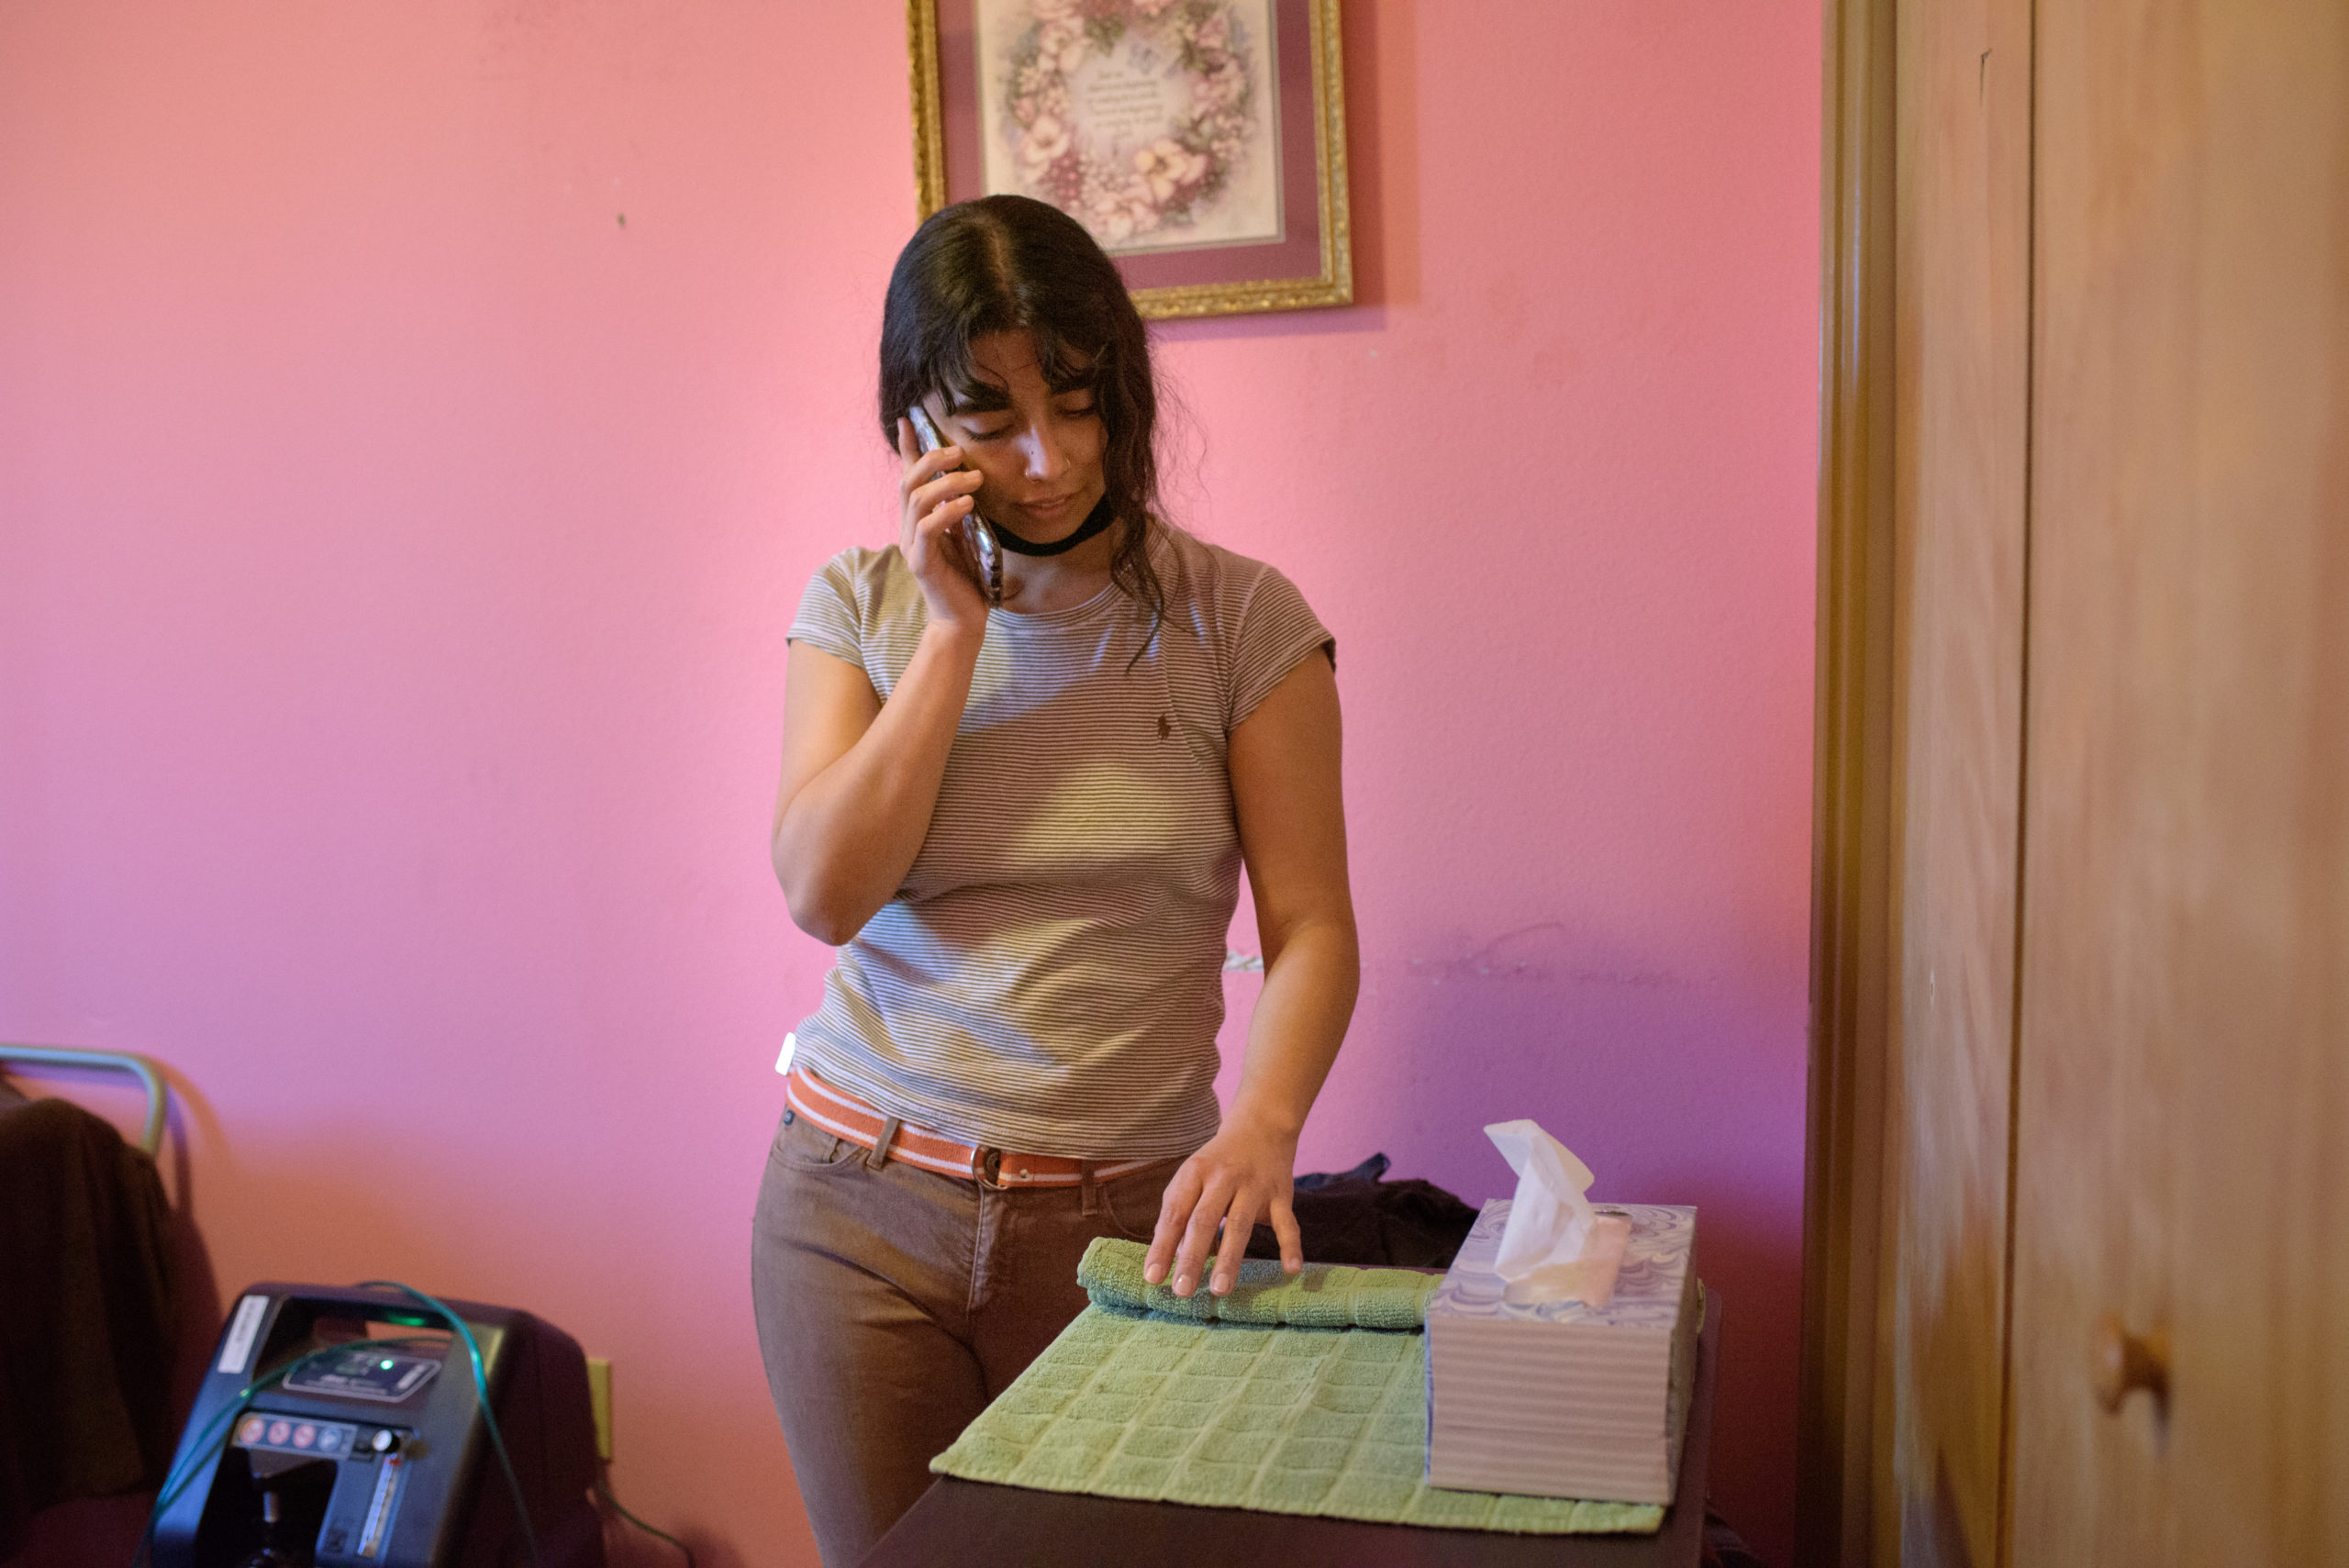 Payday too late: New Mexico bungled payday for hundreds of Medicaid caregivers